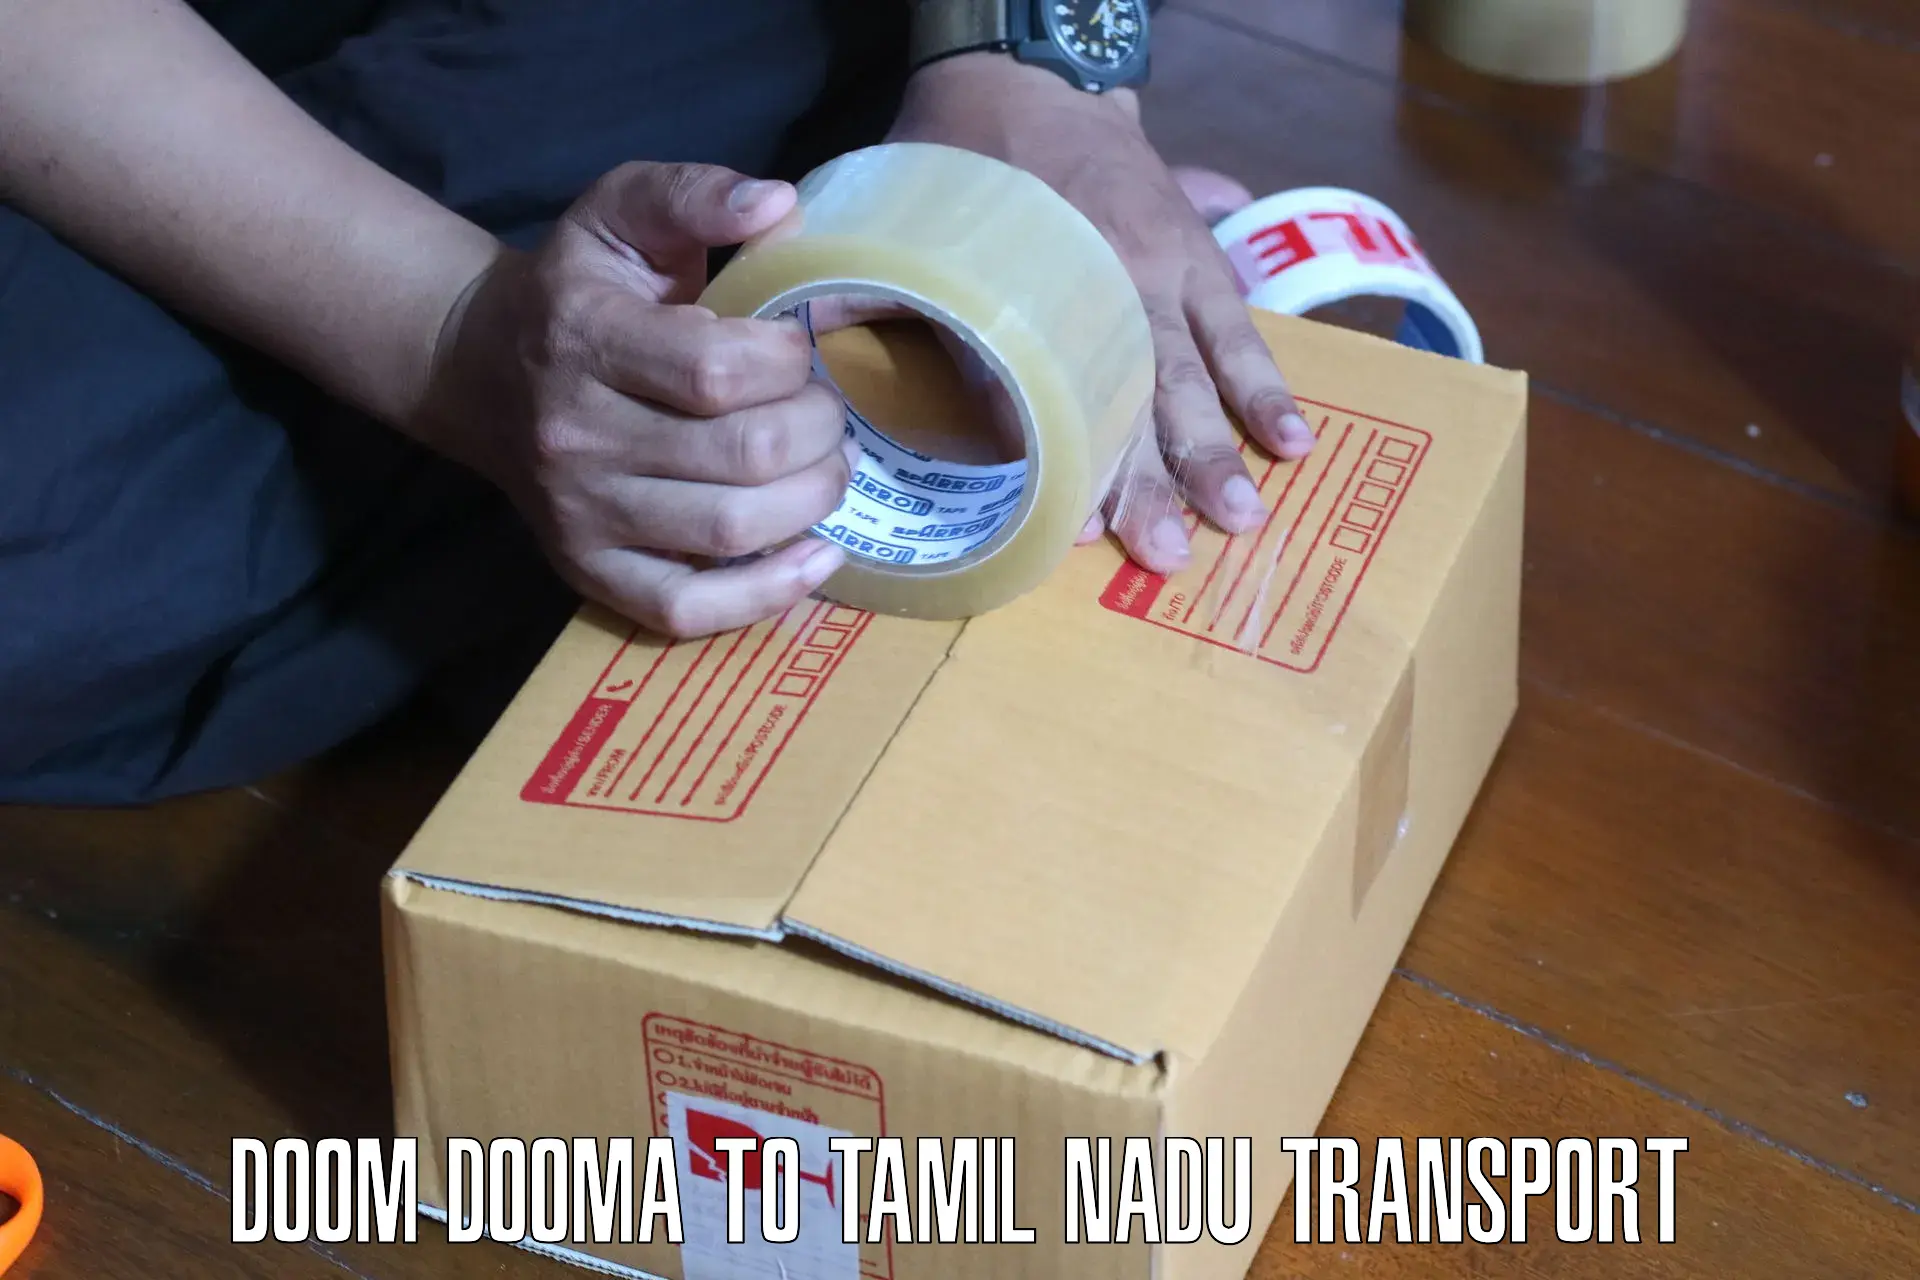 Nationwide transport services Doom Dooma to Natham